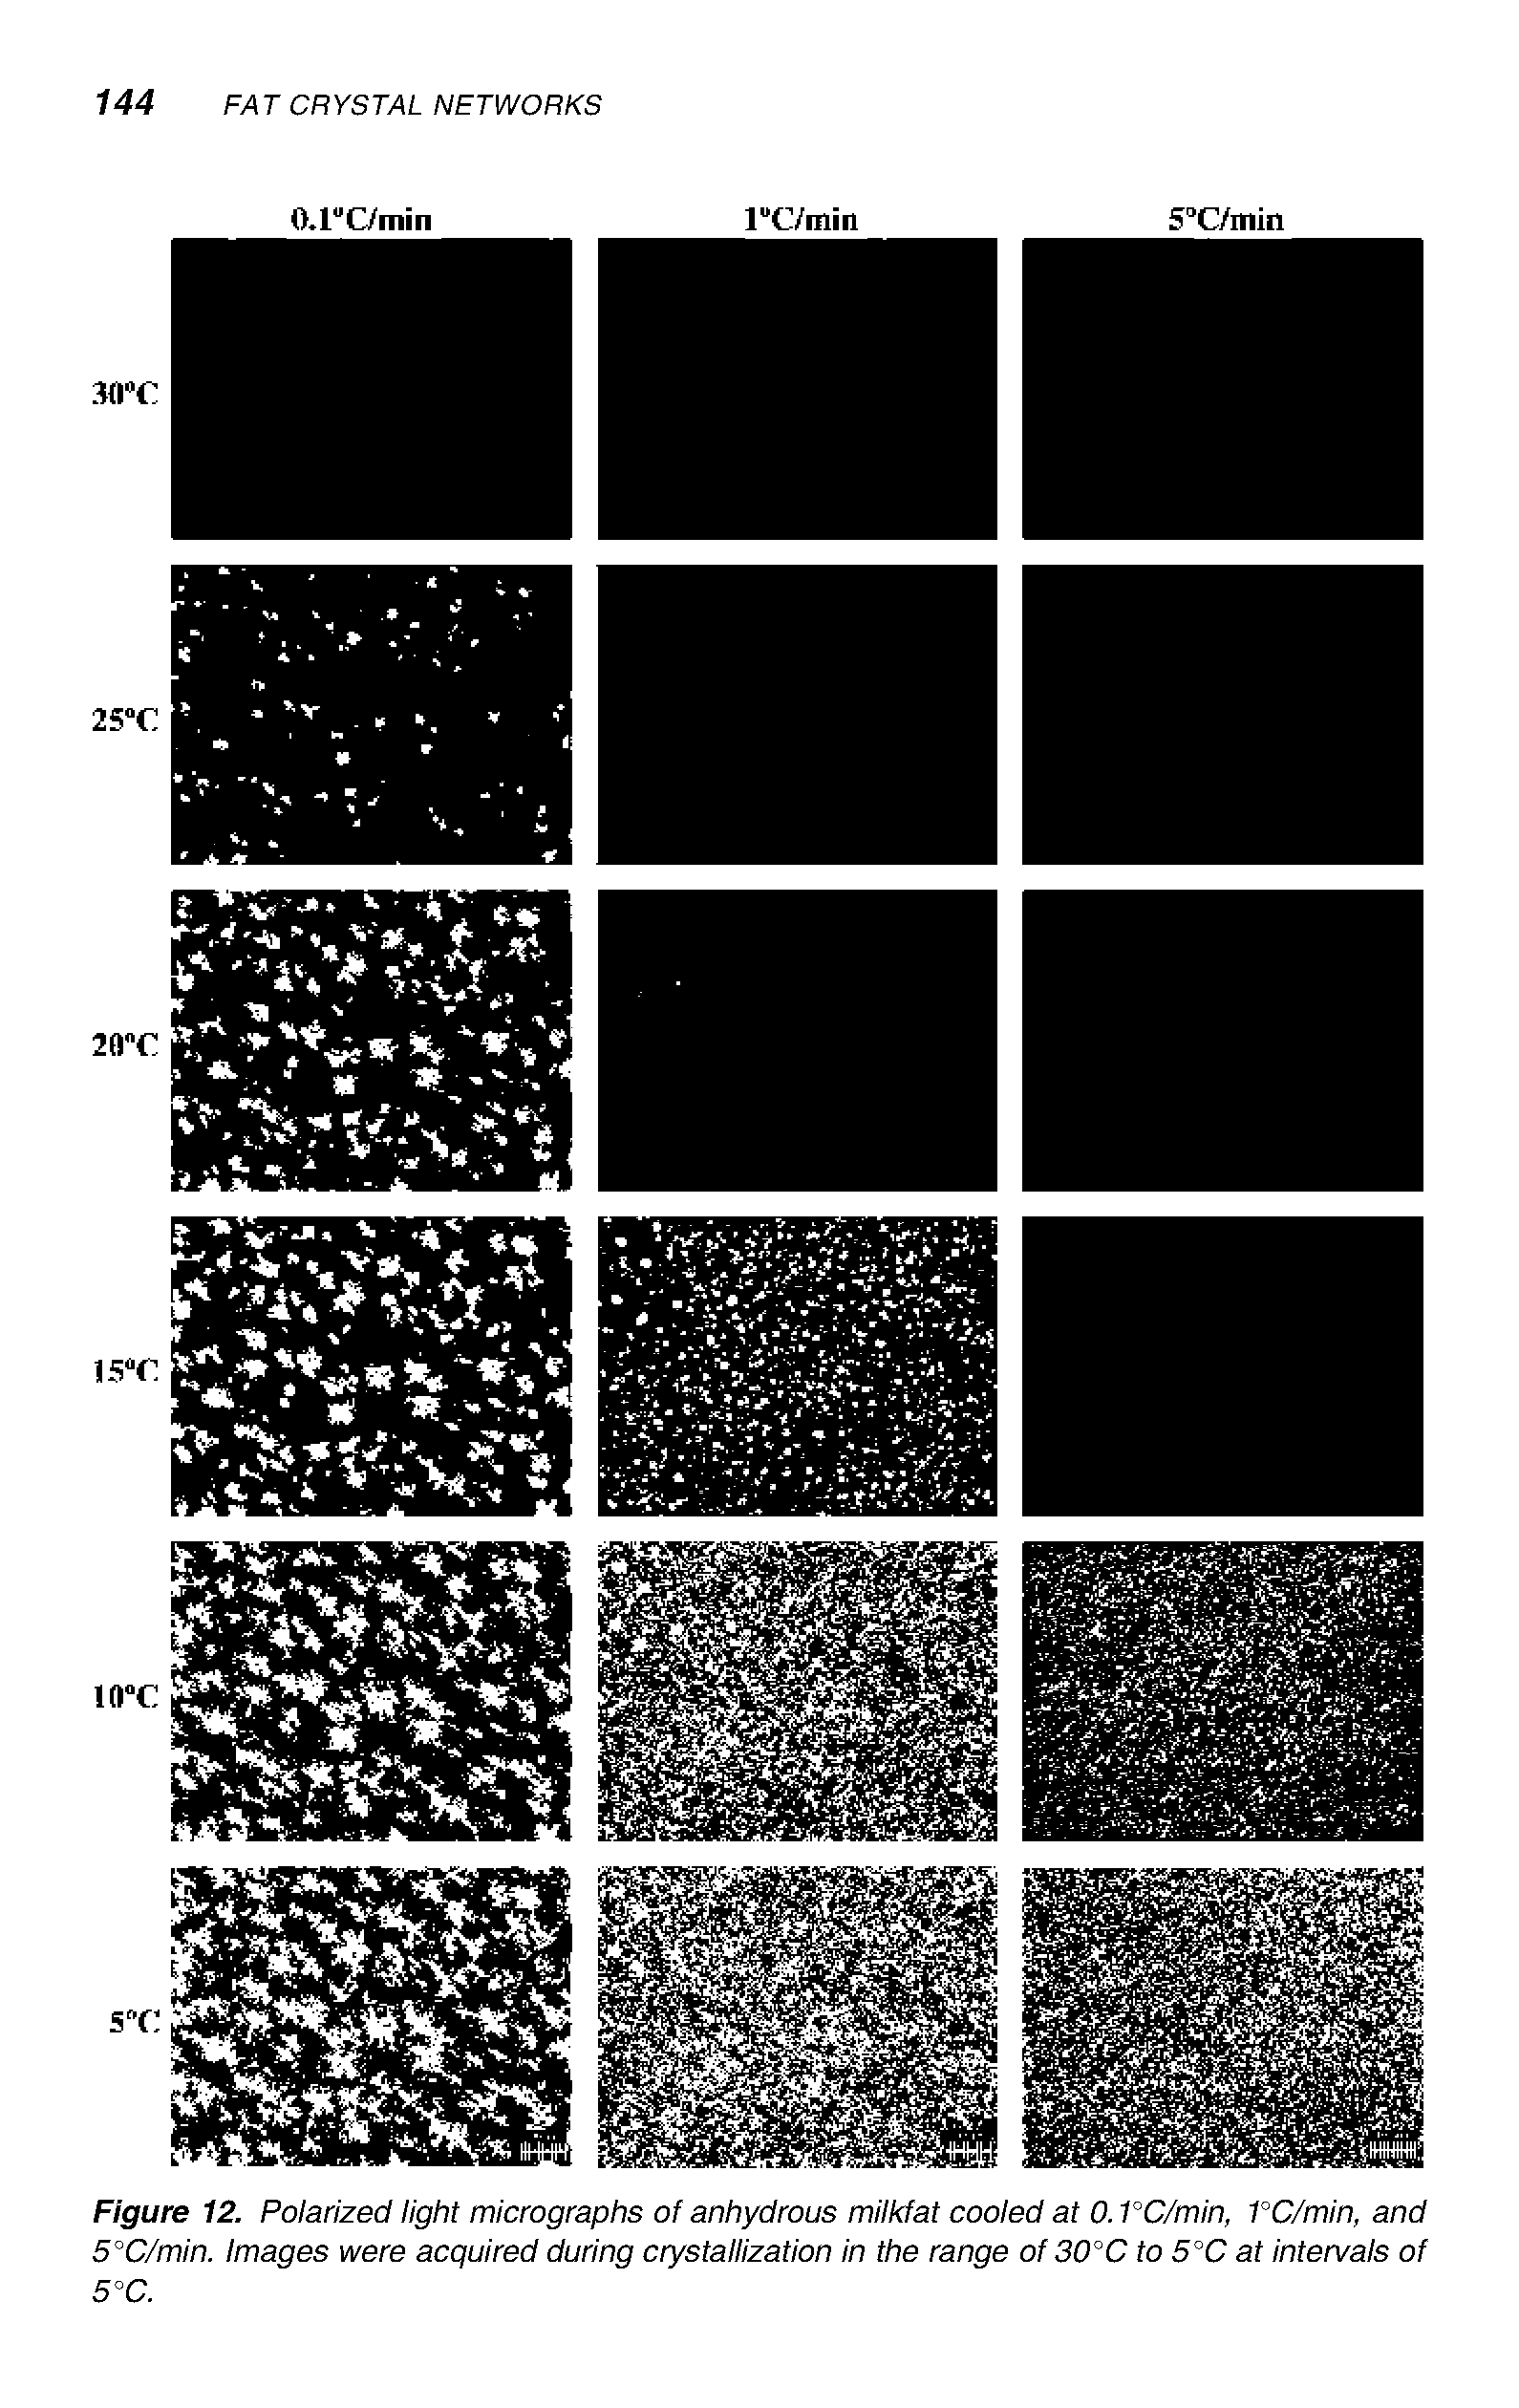 Figure 12. Polarized light micrographs of anhydrous milkfat cooled at 0. PC/min, PC/min, and 5°C/min. Images were acquired during crystallization in the range of 30°C to 5°C at intervals of 5°C.